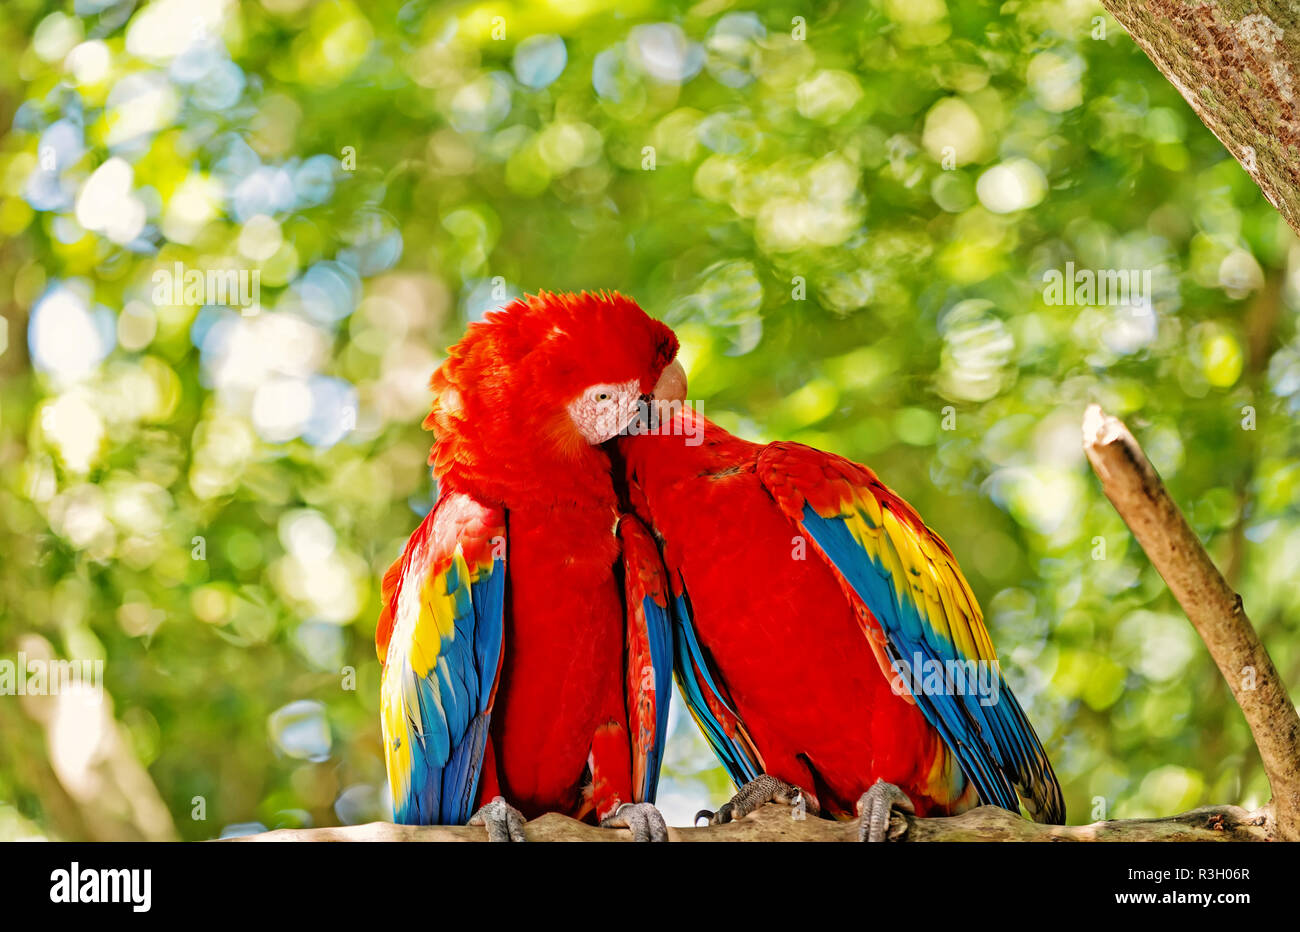 ara macaw parrot. Cute pair of parrots or birds, scarlet macaws or ...